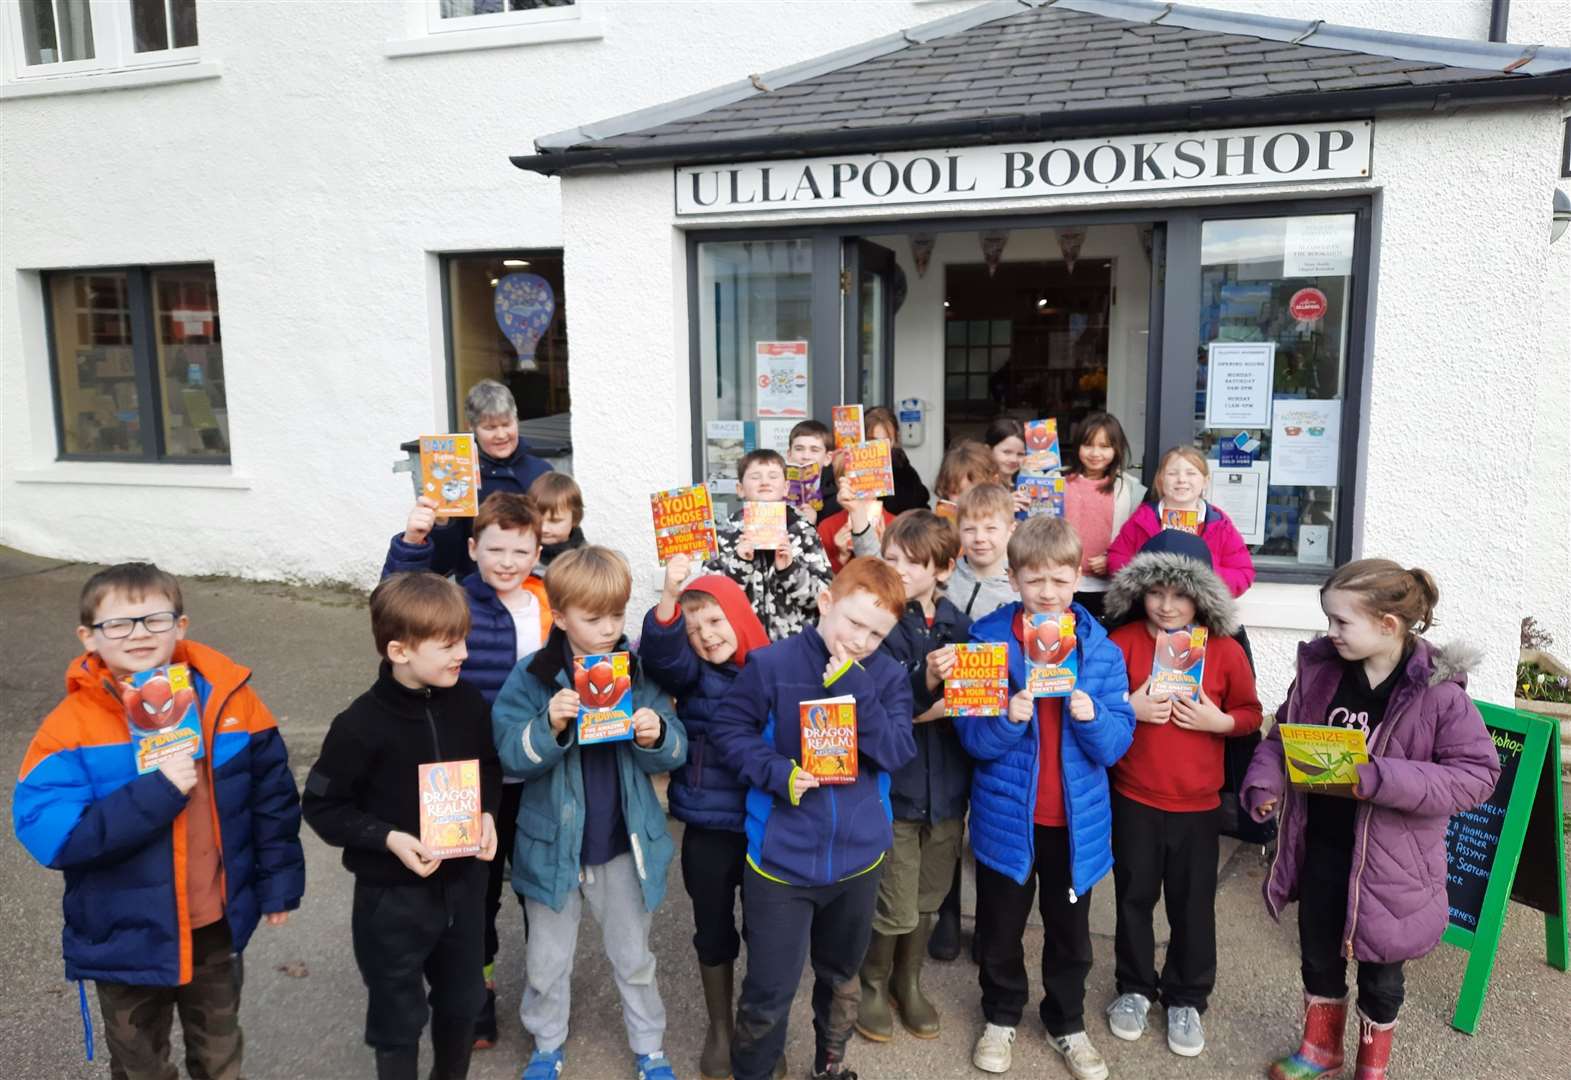 Ullapool Bookshop has lots of happy customers on World Book Day as local primary school children dropped by to redeem their vouchers.